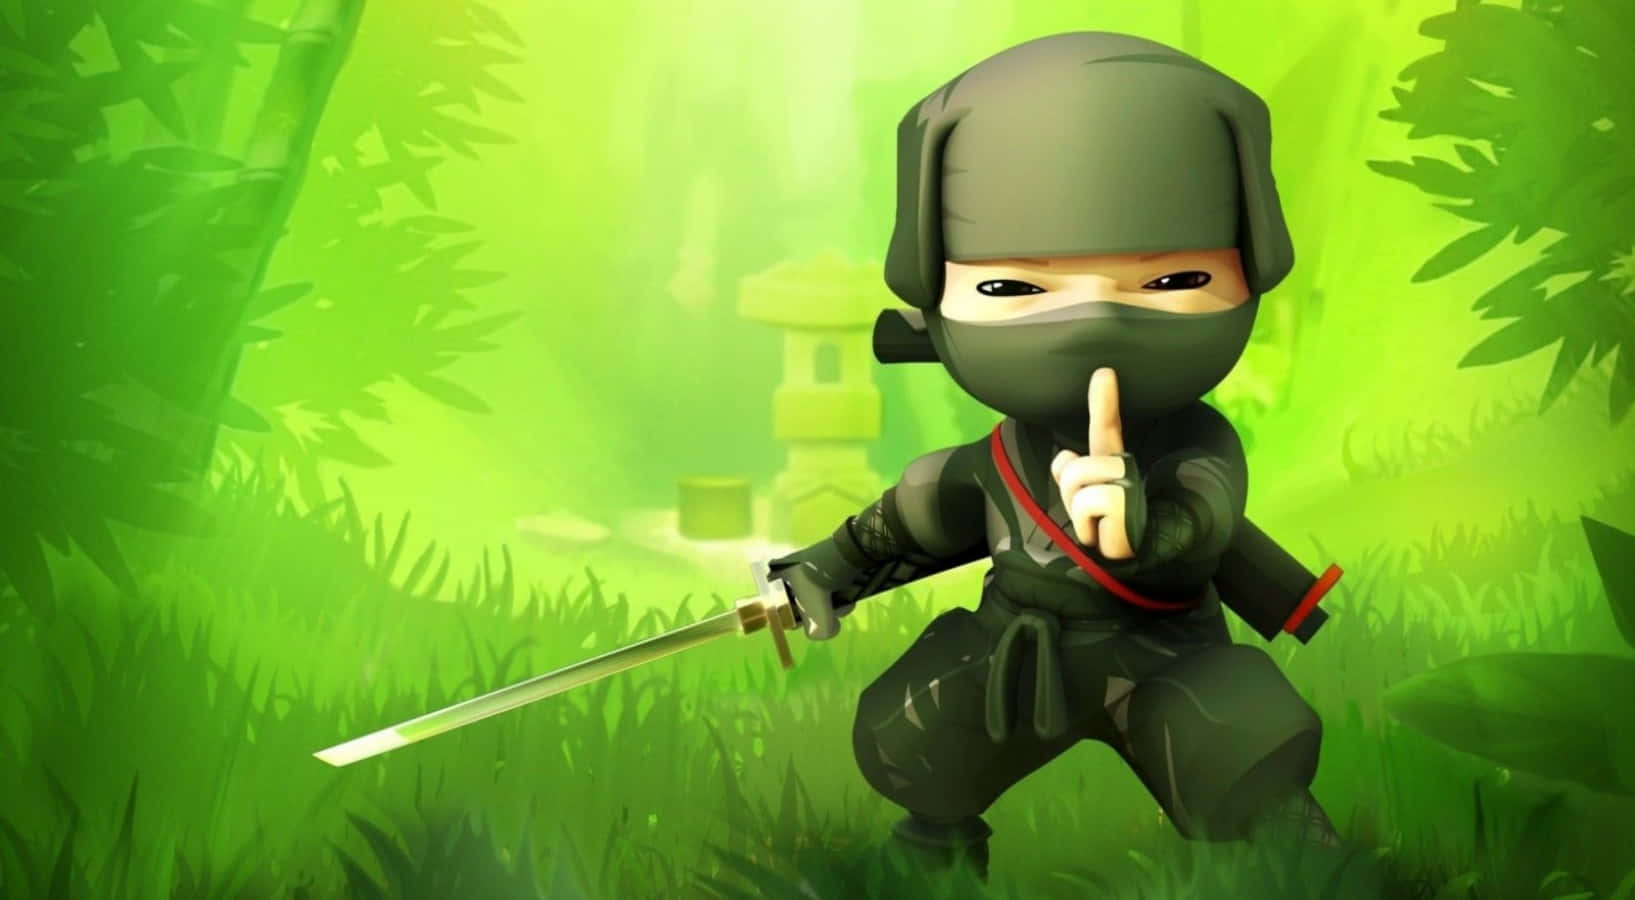 Cool And Cute Ninja In The Forest Wallpaper